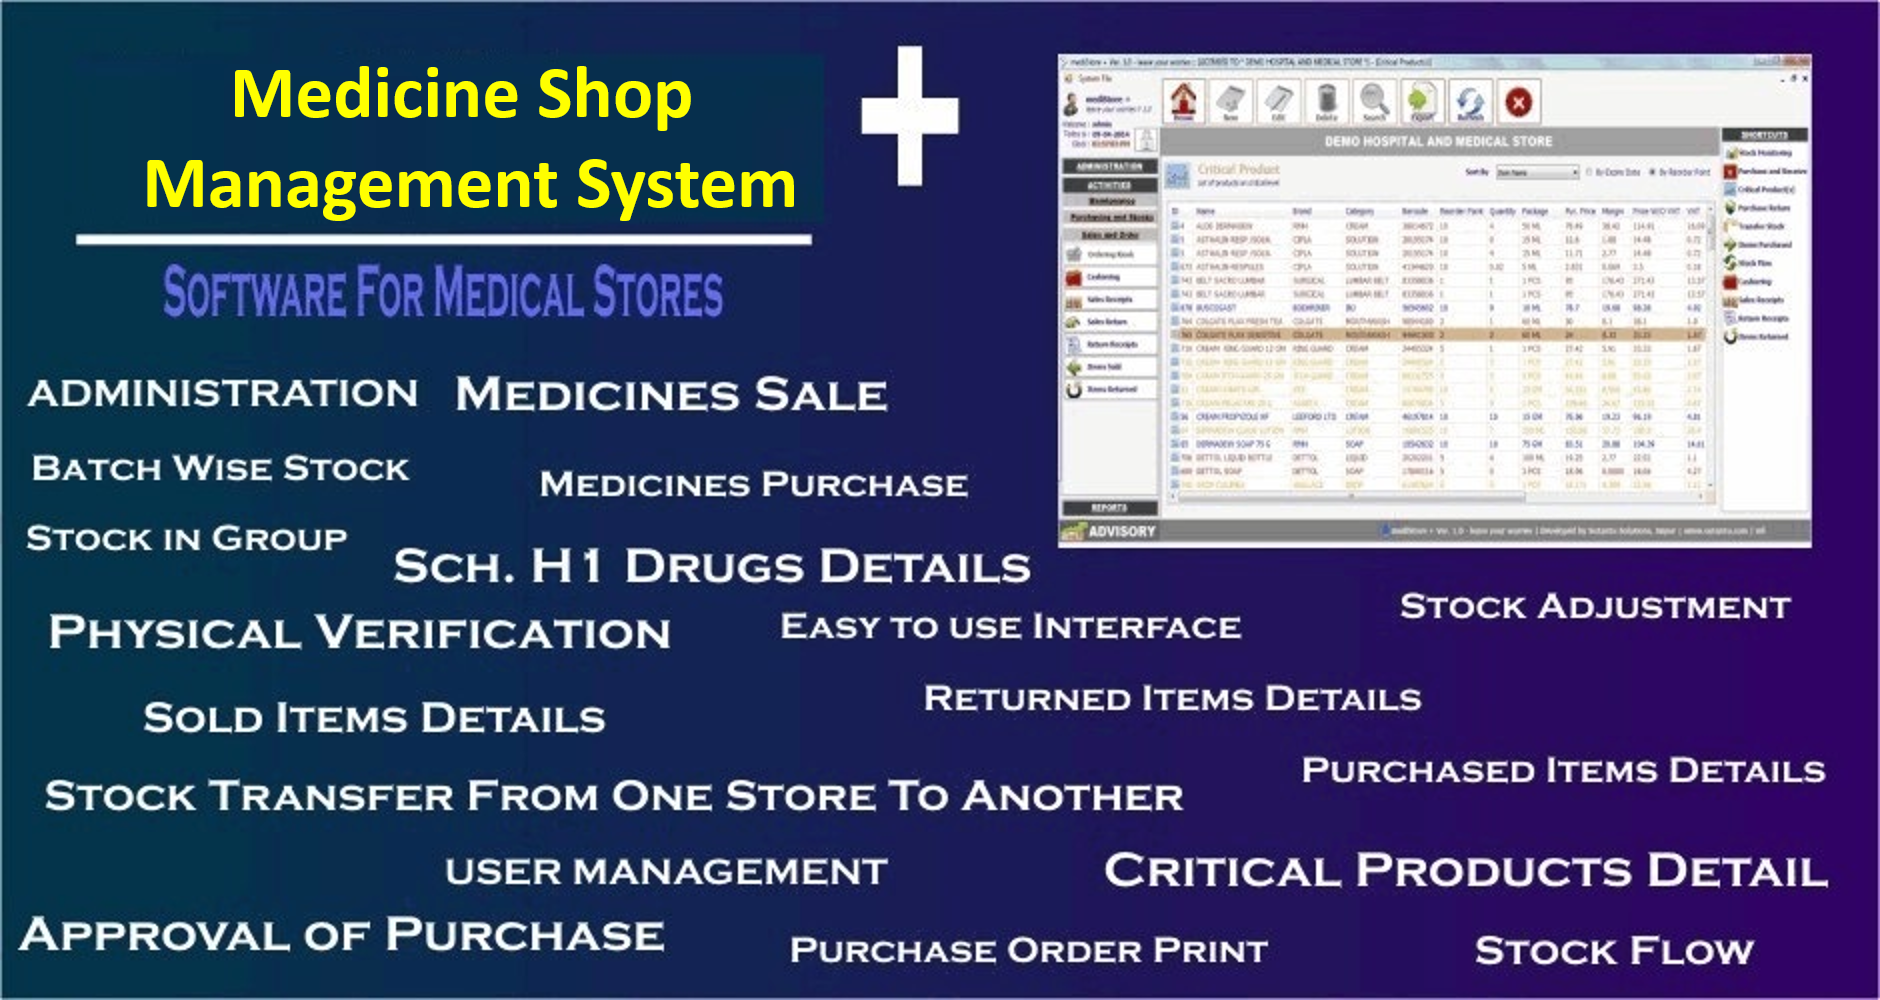 medical store management system project java